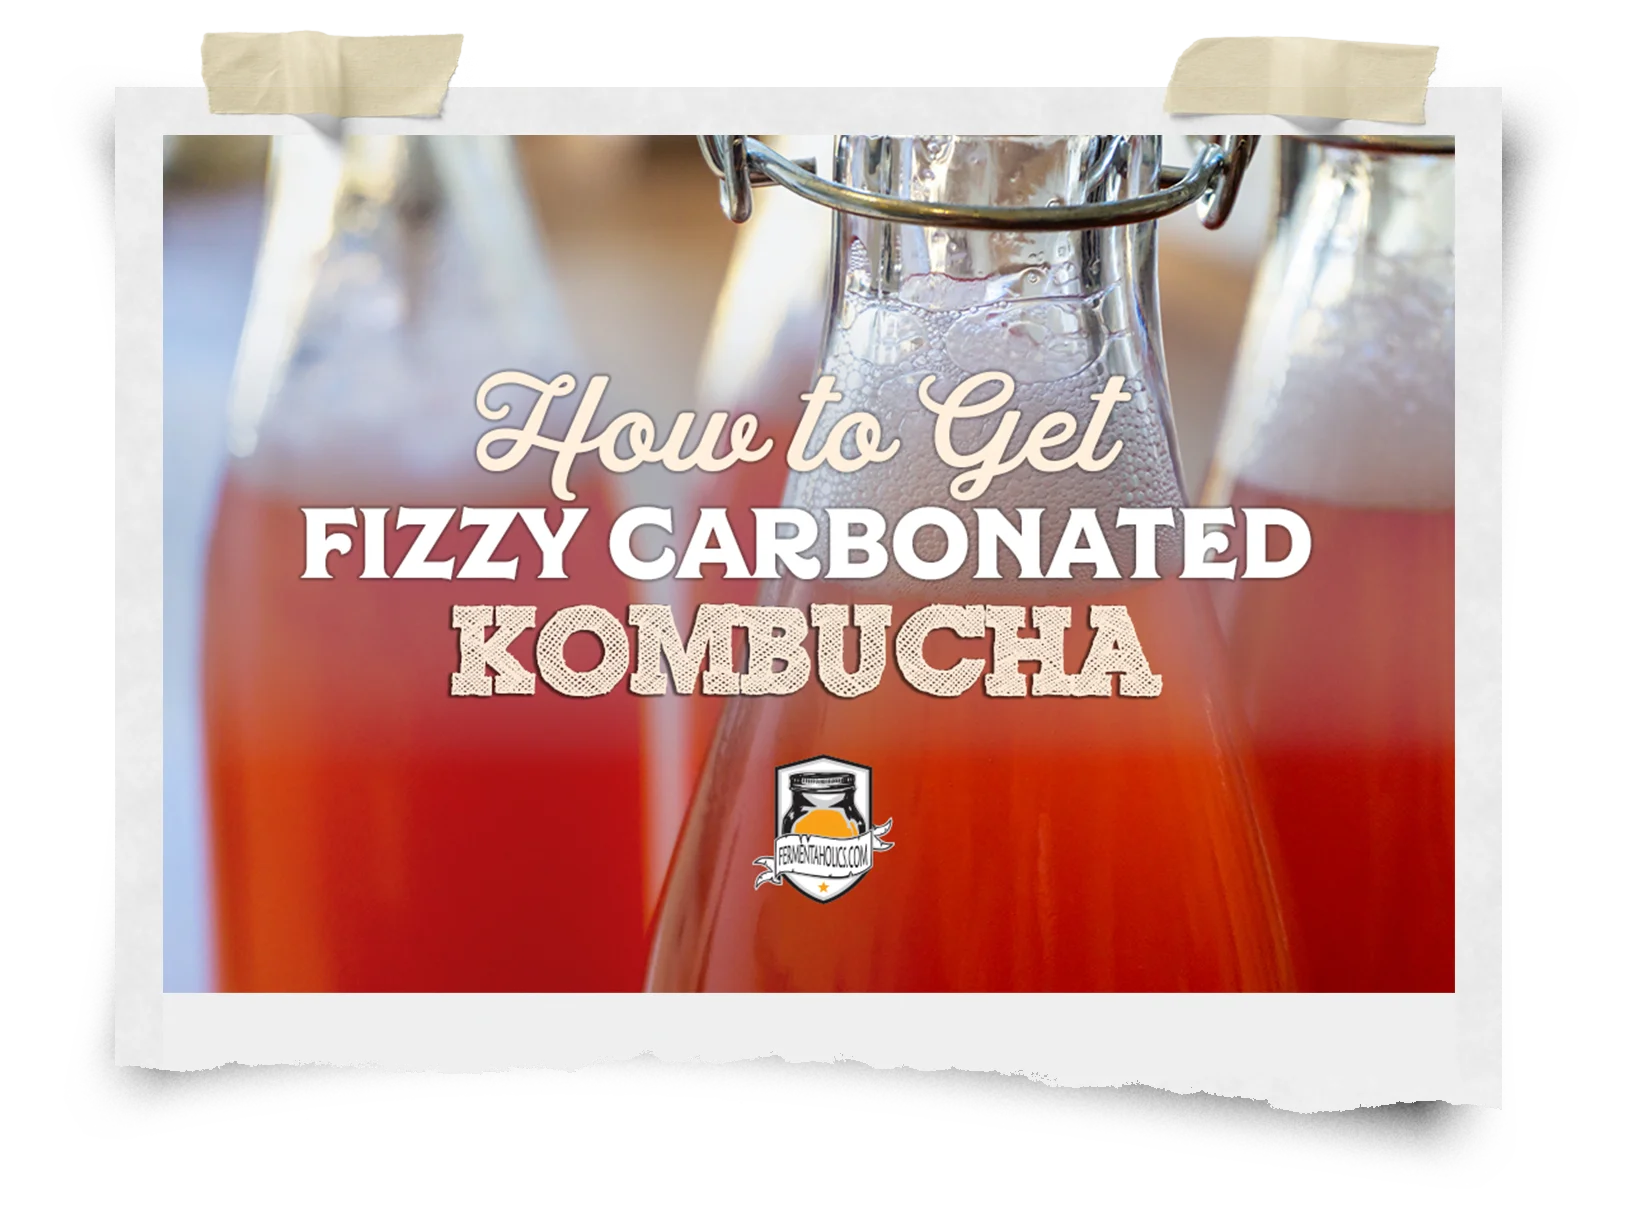 How To Get Fizzy Carbonated Kombucha